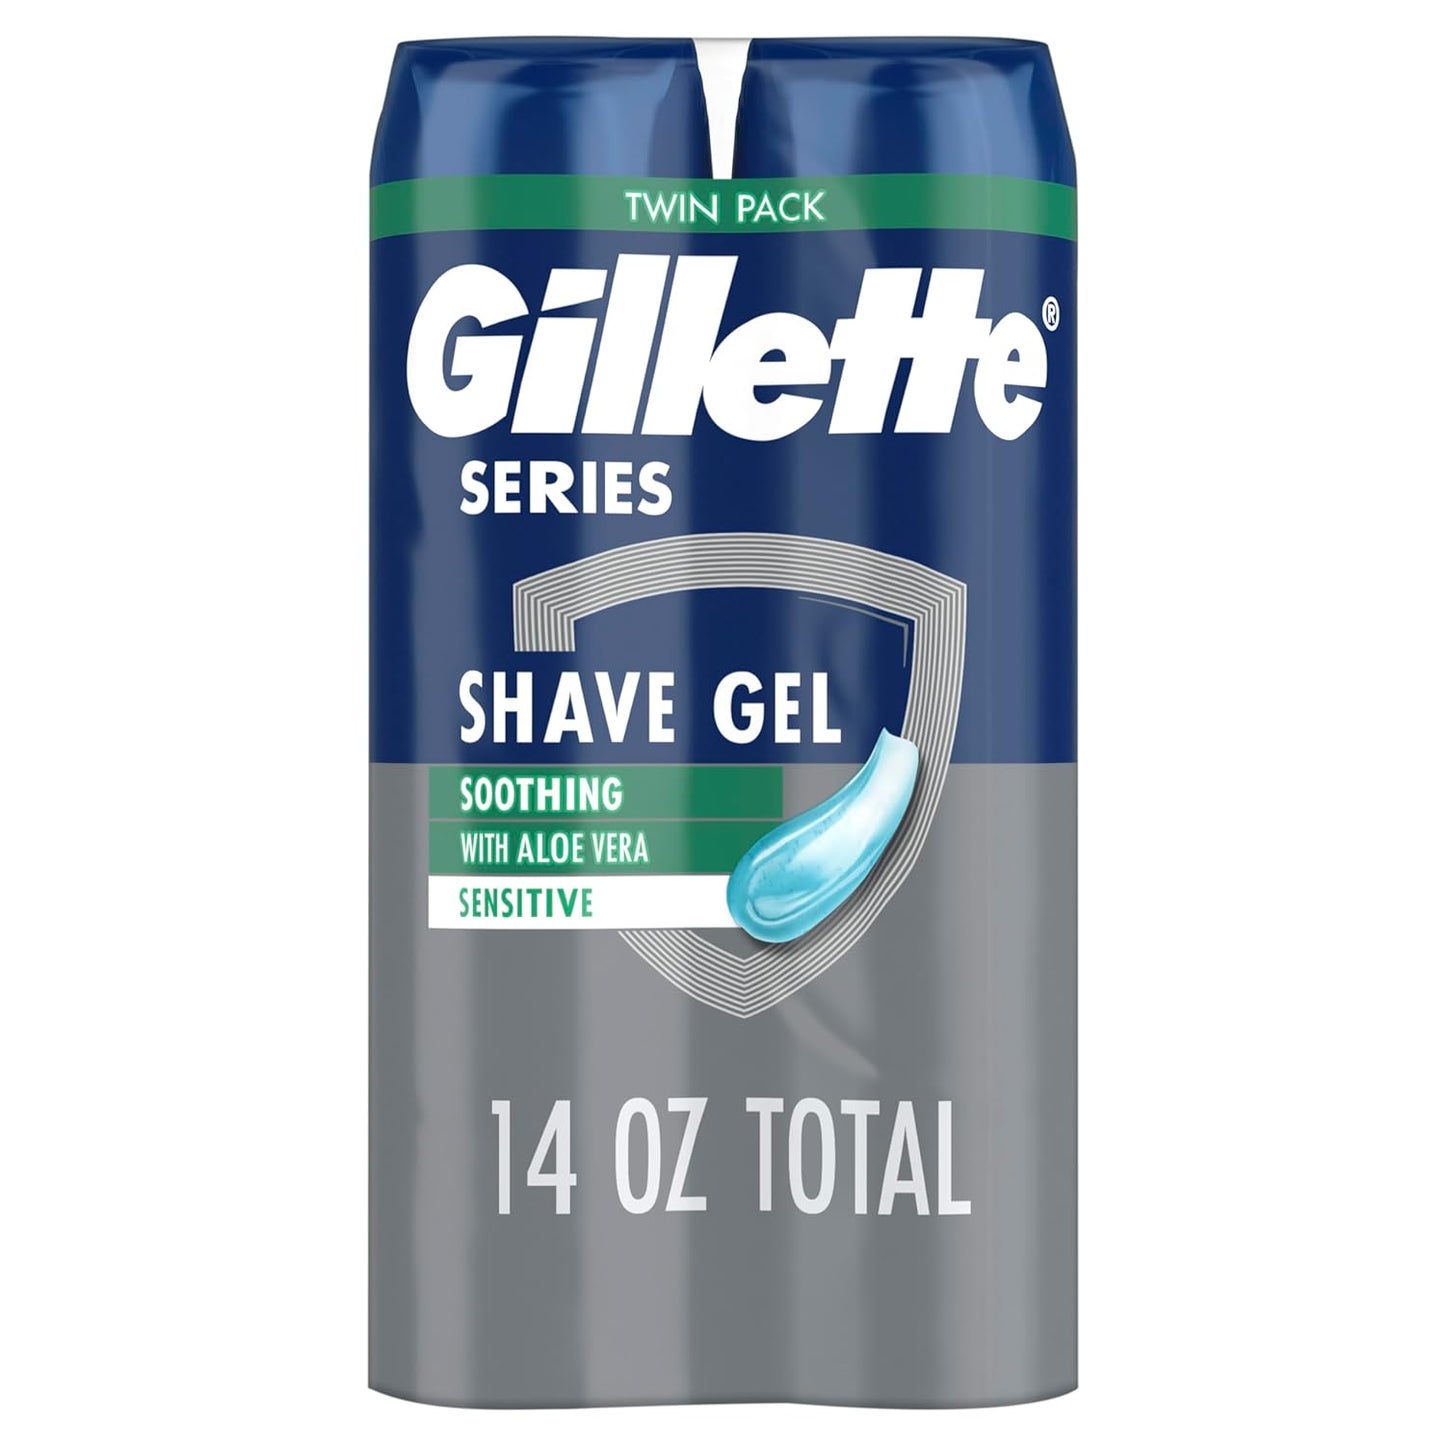 Uniites™, Gillette Series 3X Action Shave Gel, Sensitive Twin Pack, 7 Oz (Pack of 2) Packaging may vary, $6.91